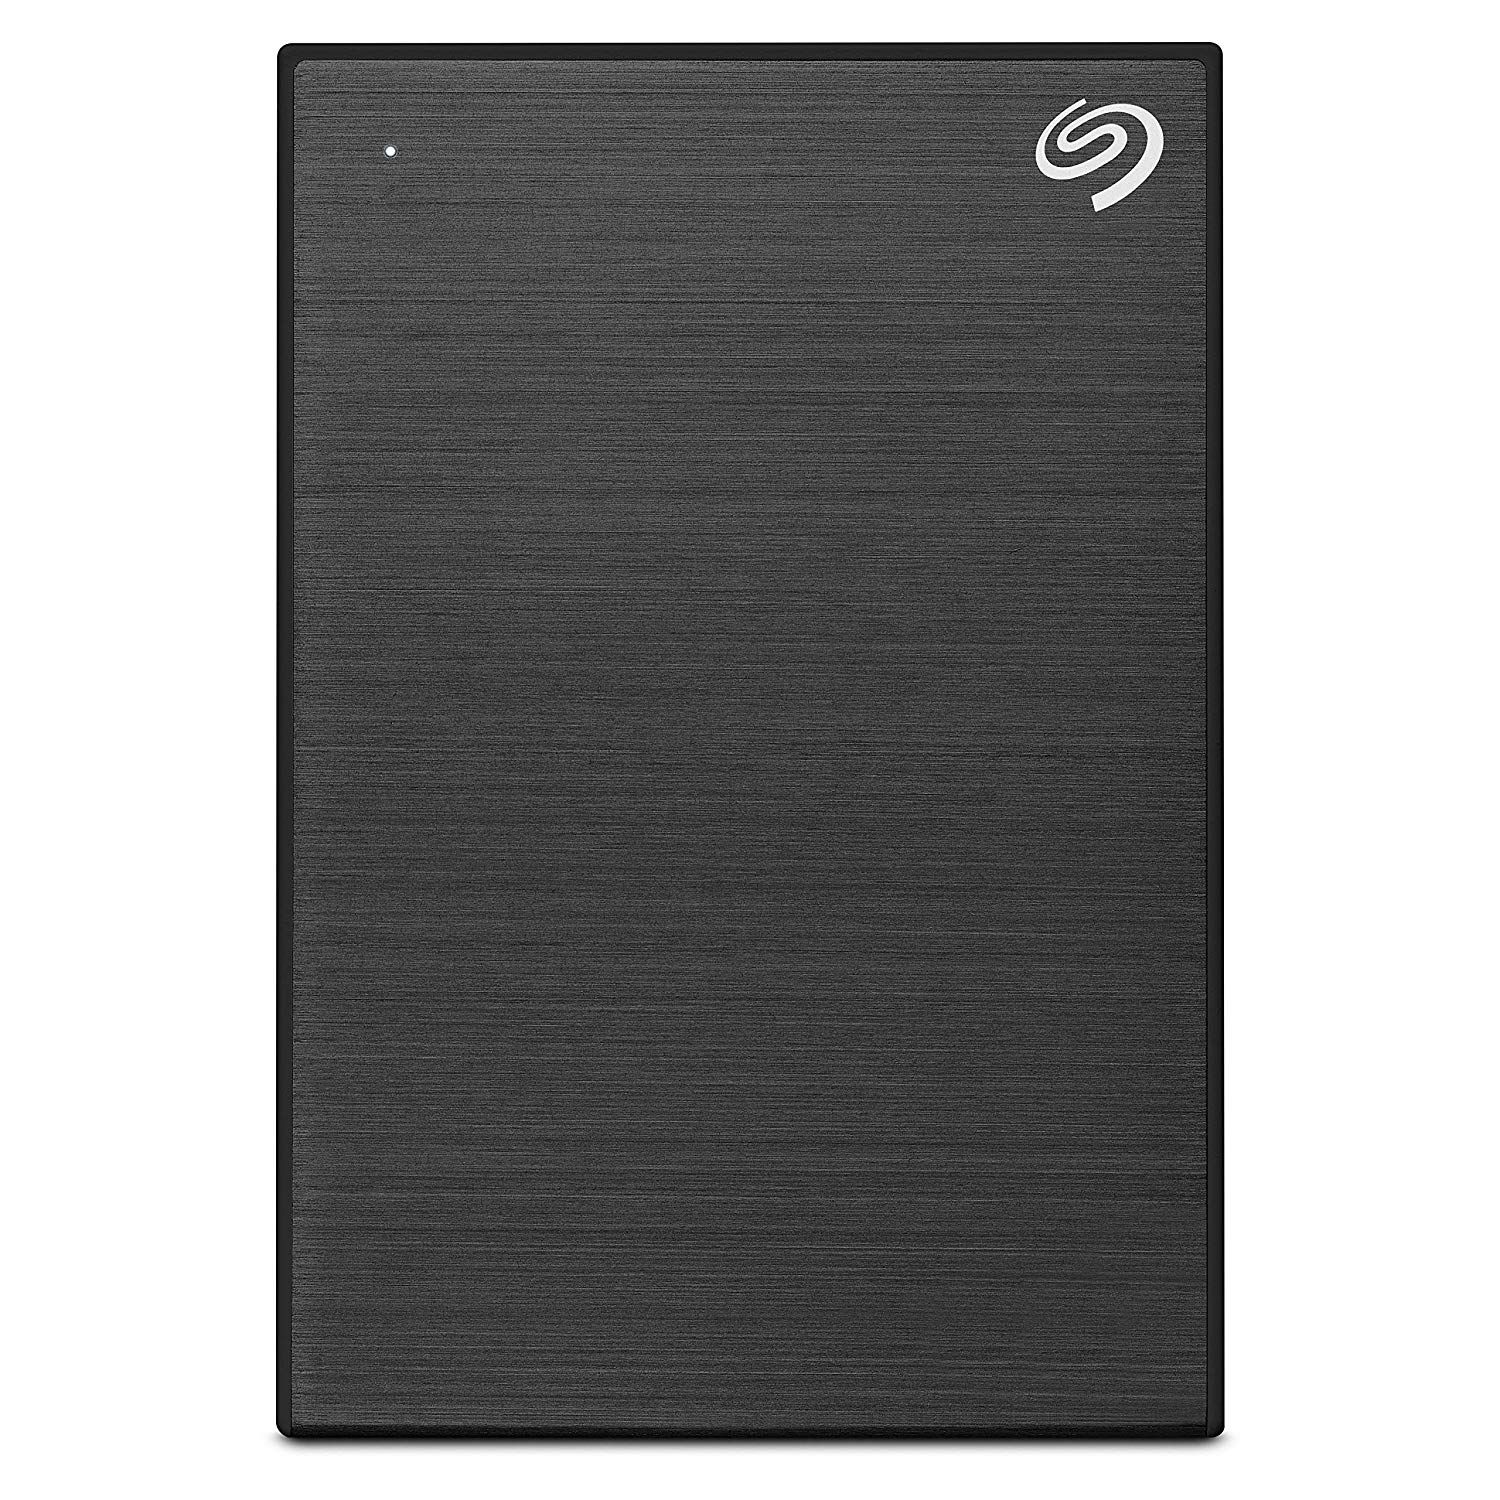     			Seagate Backup Plus Slim 5TB External Hard Drive Portable HDD-Silver USB 3.0 for PC Laptop and Mac, 1 year Mylio Create, 4 Months Adobe CC Photography, and 3-year Rescue Services (STHN5000400)